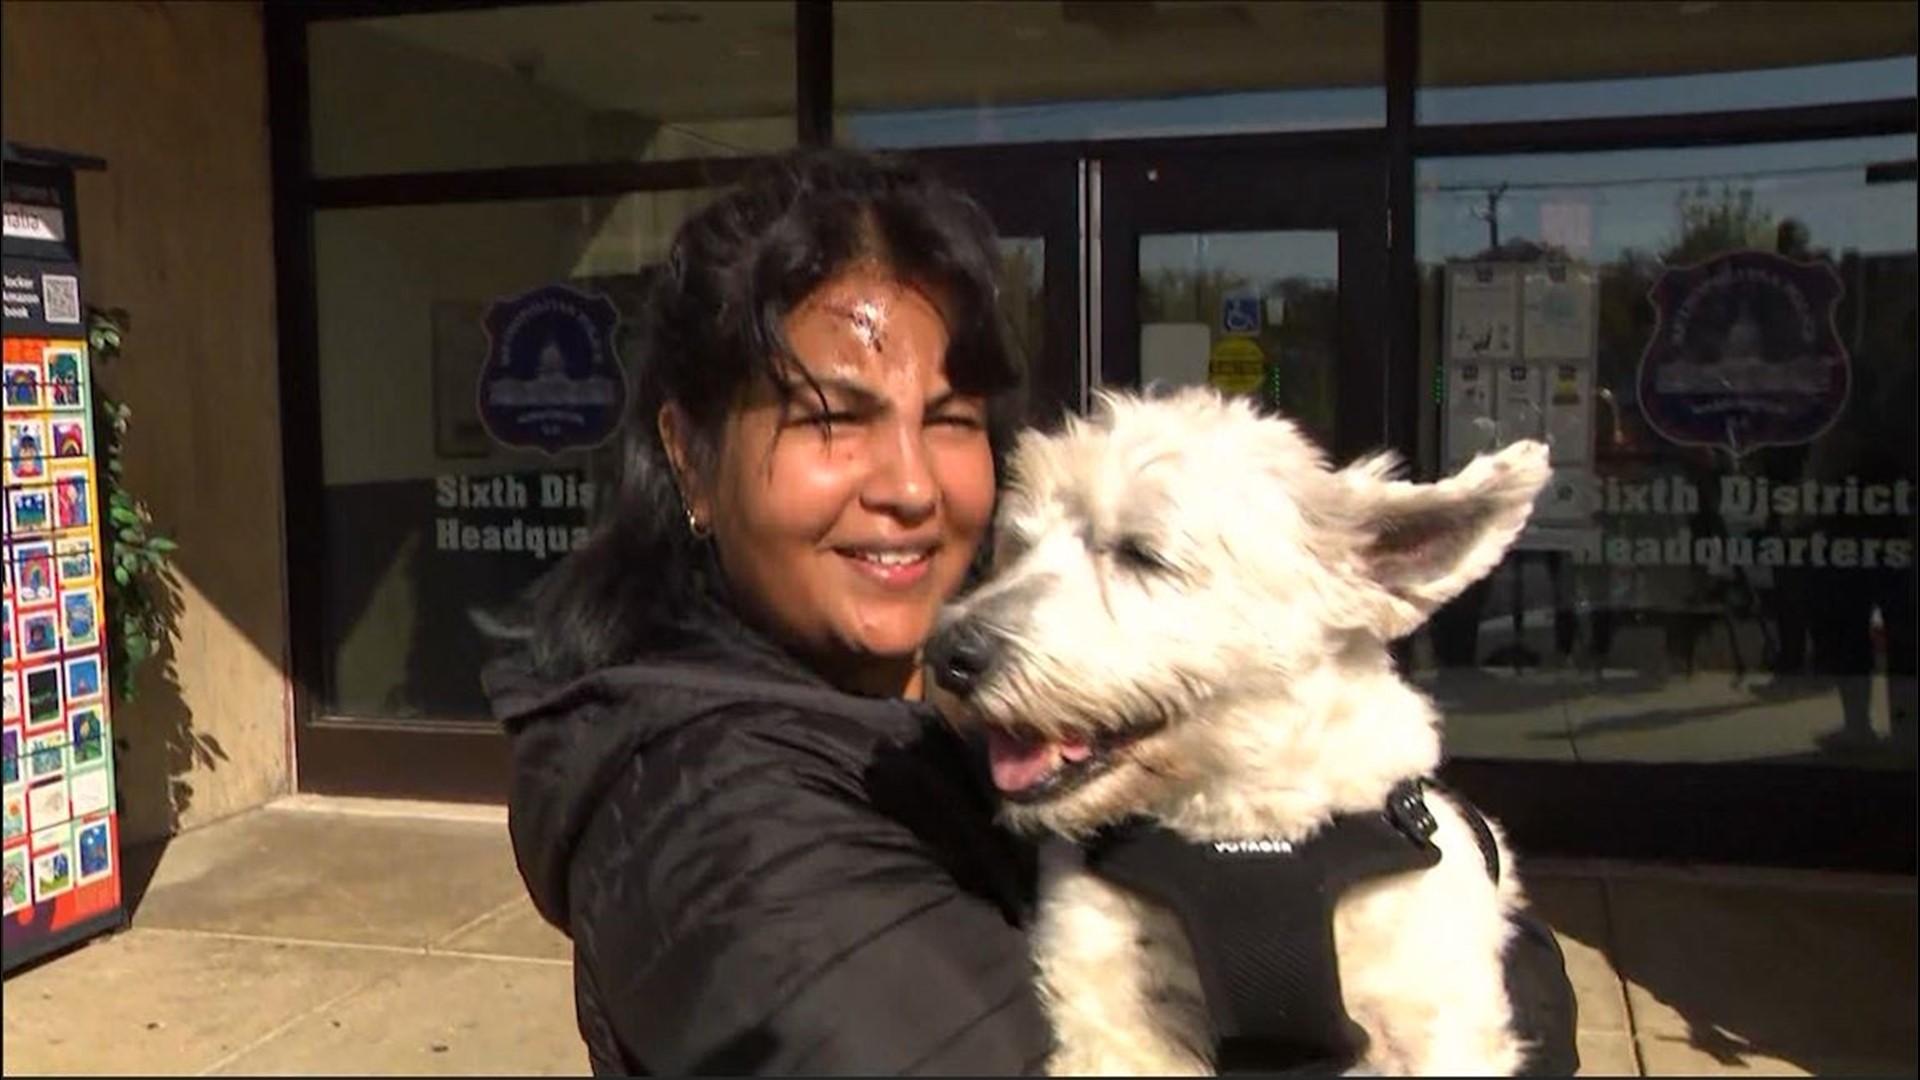 Three days after a violent attack in Northeast D.C. where a woman had her dog ripped from her arms, the victim and her nearly 14-year-old pup were reunited.